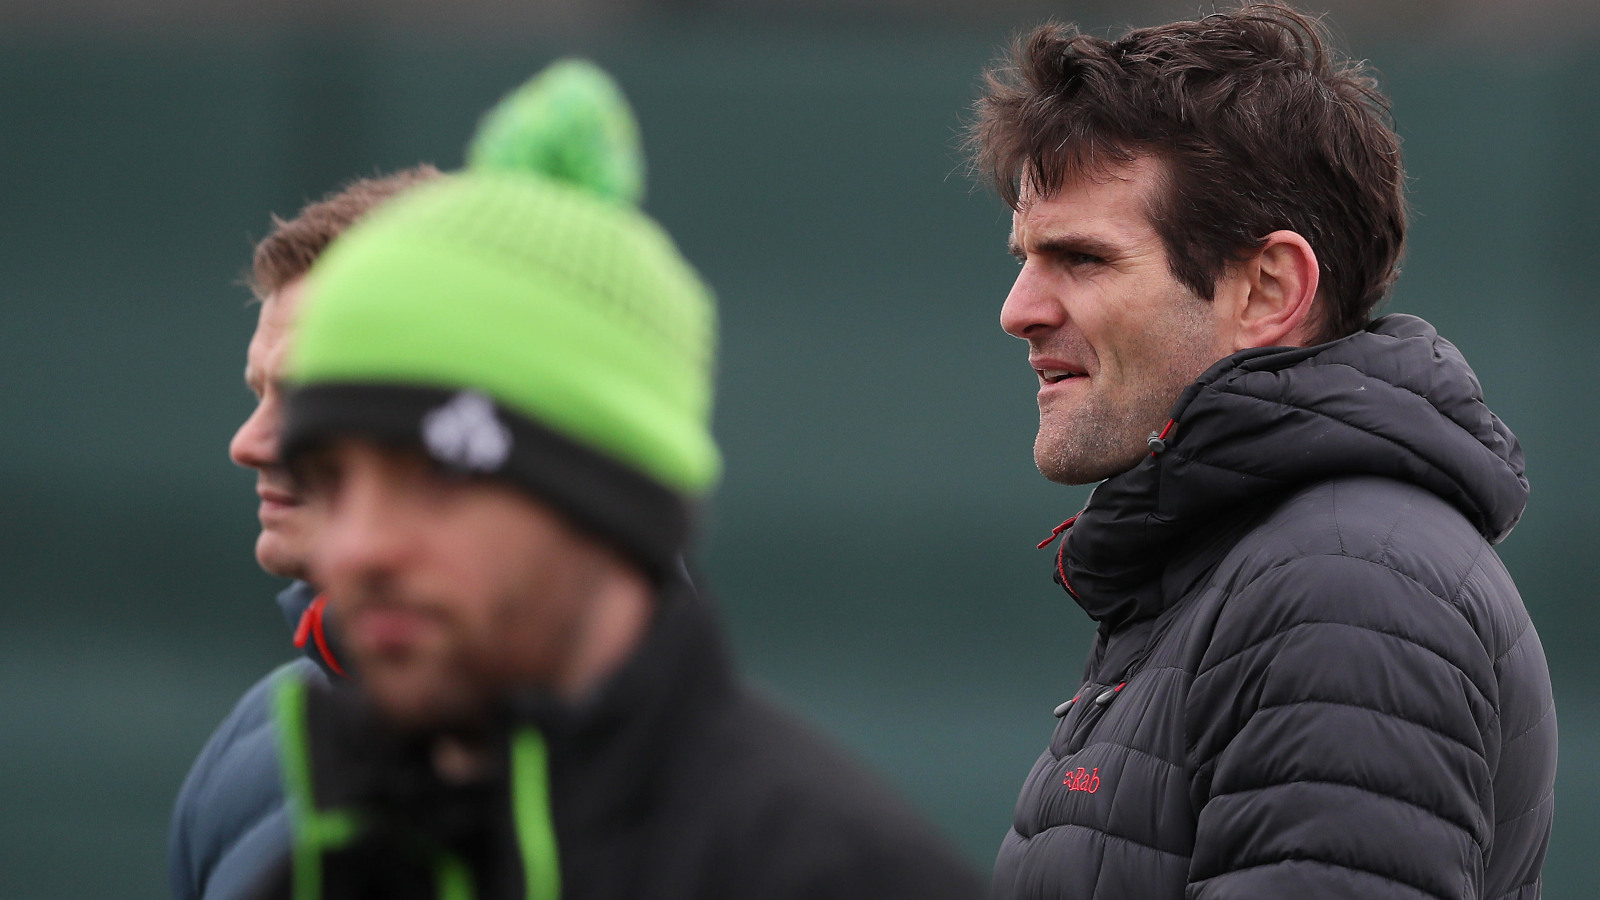 former ireland star excited for reunion with old friends as he reflects on transition from ‘grumpy’ player to ‘chilled out’ coach